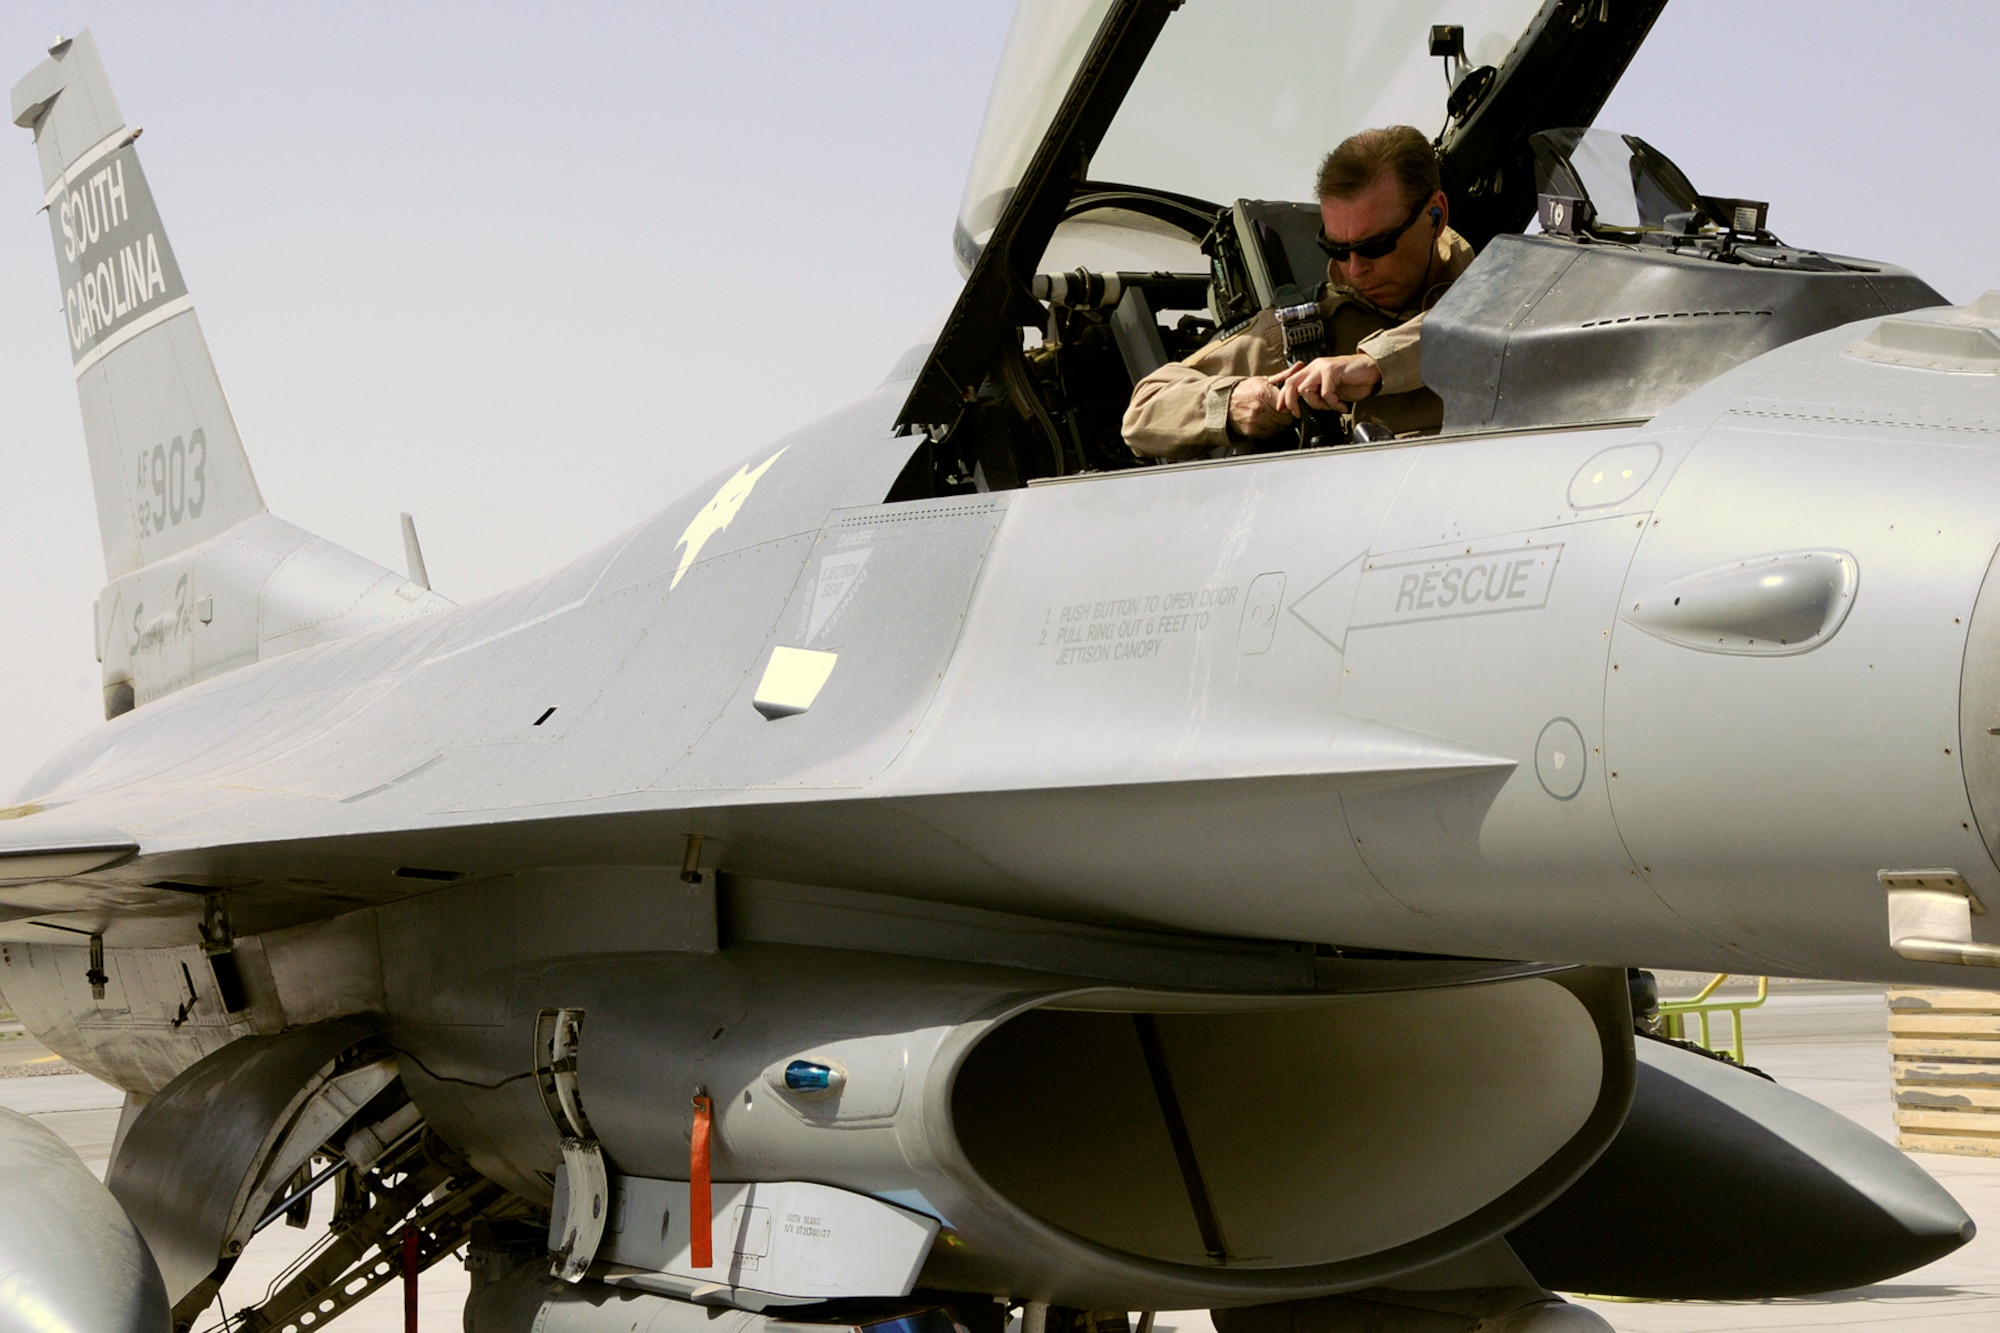 Colonel David Meyer, Vice Commander assigned to the 451st Expeditionary Operations Group at Kandahar Airfield, Afghanistan, prepares to launch an F-16 Fighting Falcon for a mission 18 May, 2012. Personnel are deployed from McEntire Joint National Guard Base, S.C., in support of Operation Enduring Freedom. Swamp Fox F-16's, pilots, and support personnel began their Air Expeditionary Force deployment early April to take over flying missions for the air tasking order and provide close air support for troops on the ground in Afghanistan.
(U.S. Air Force photo/Tech. Sgt. Caycee Cook)
